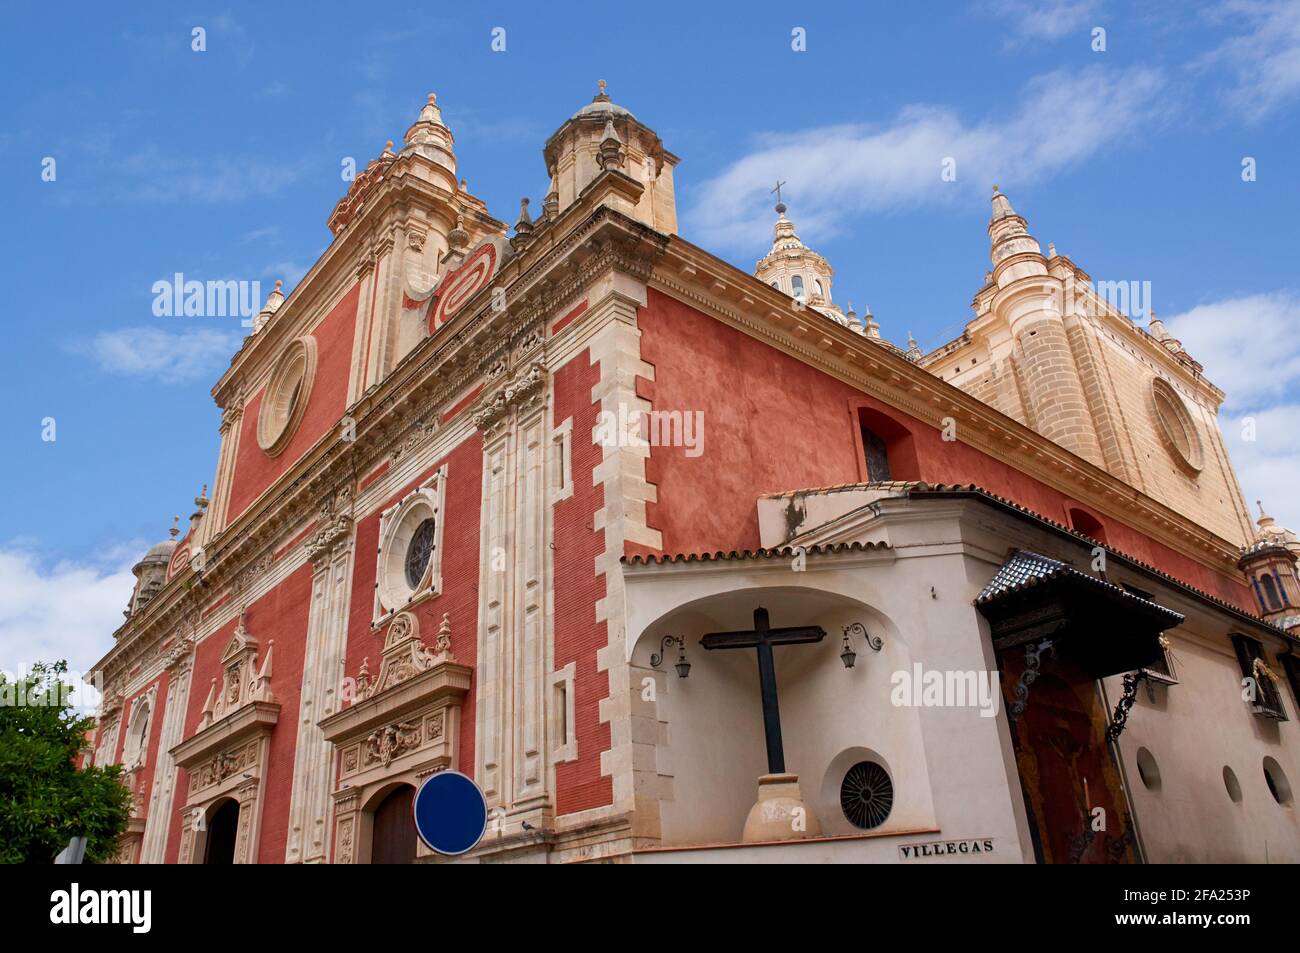 Historic buildings and monuments of Seville, Spain. Architectural details, stone facade and museums Europe. Spanish architectural. Iglesia Colegial Sa Stock Photo